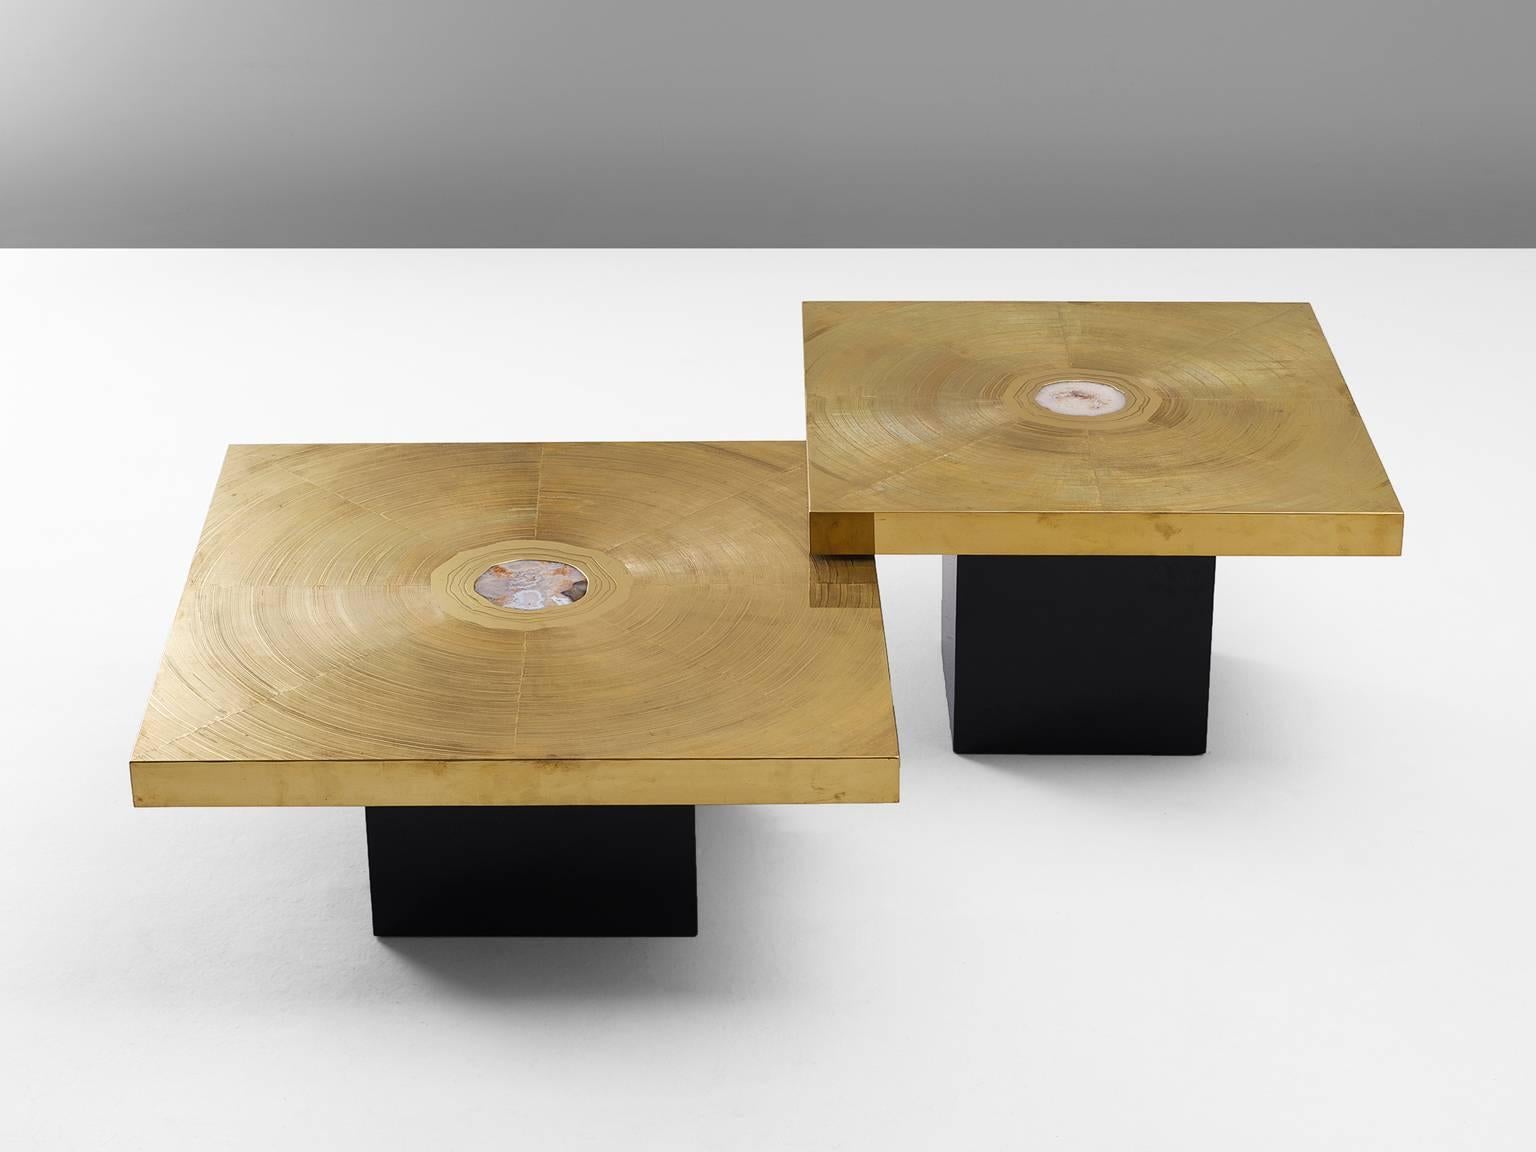 Set of two coffee tables, in brass, gemstone and wood, Belgium 1970s

Set of two signed sculptural coffee tables with beautiful etched brass top. These tables are a piece of art on their own. The square top shows a graphical spiral of lines in